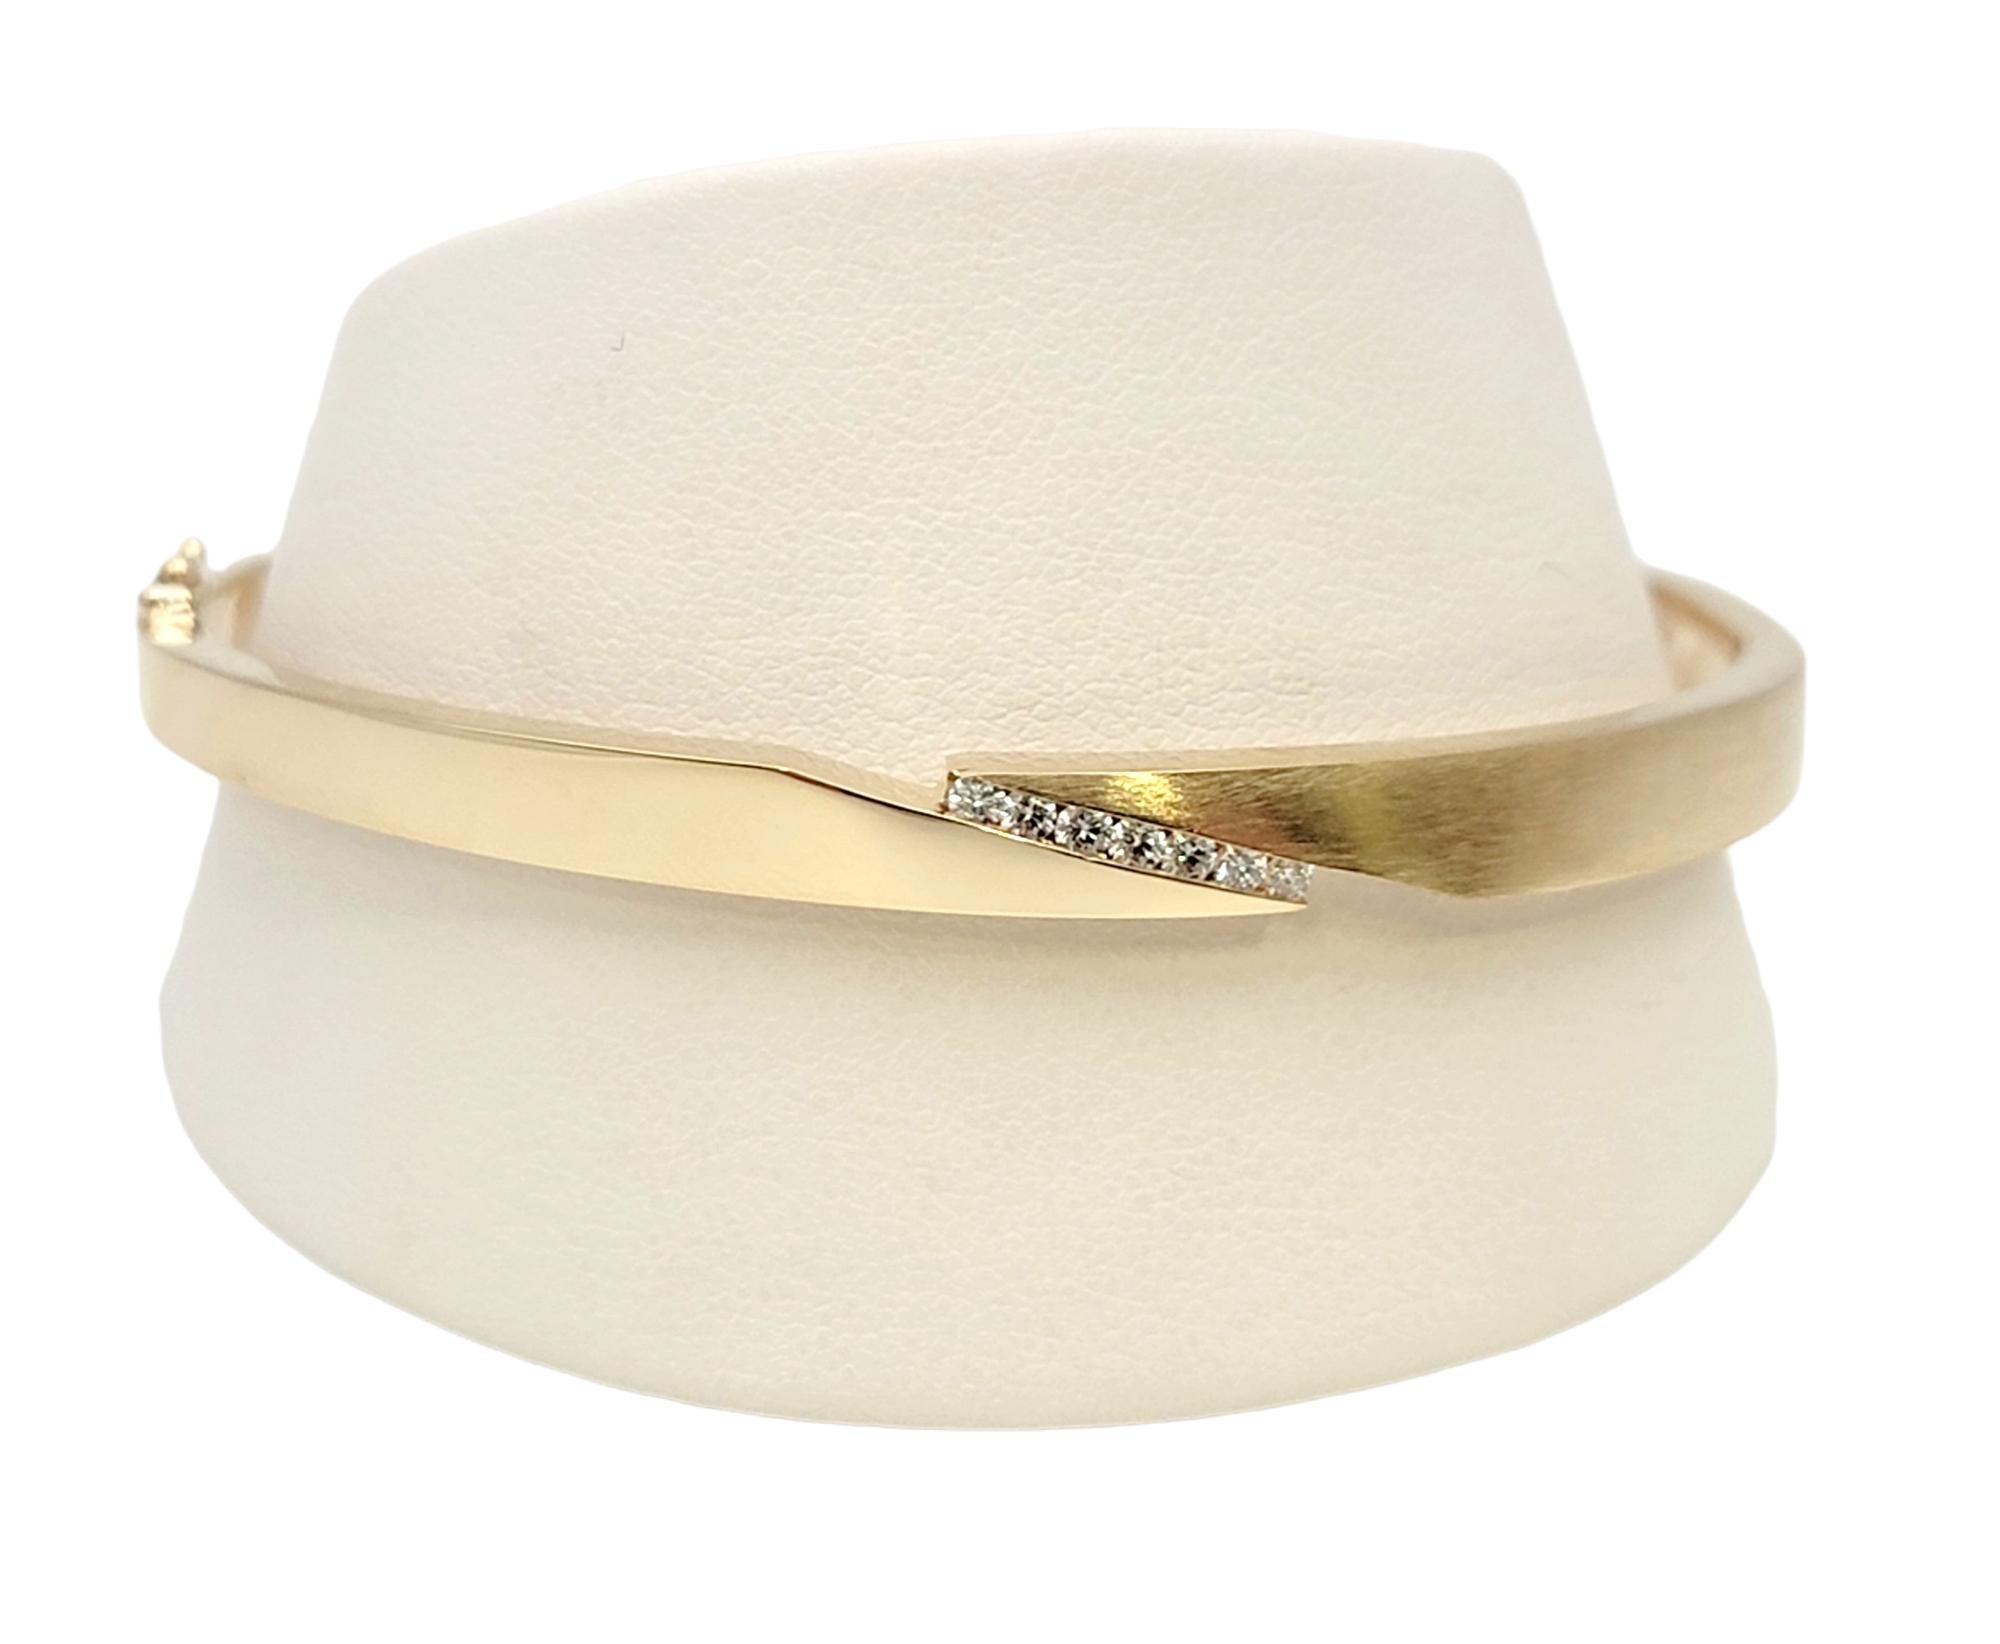 Gaulthier Brushed and Polished 14 Karat Gold Crossover Bangle with Diamonds For Sale 5